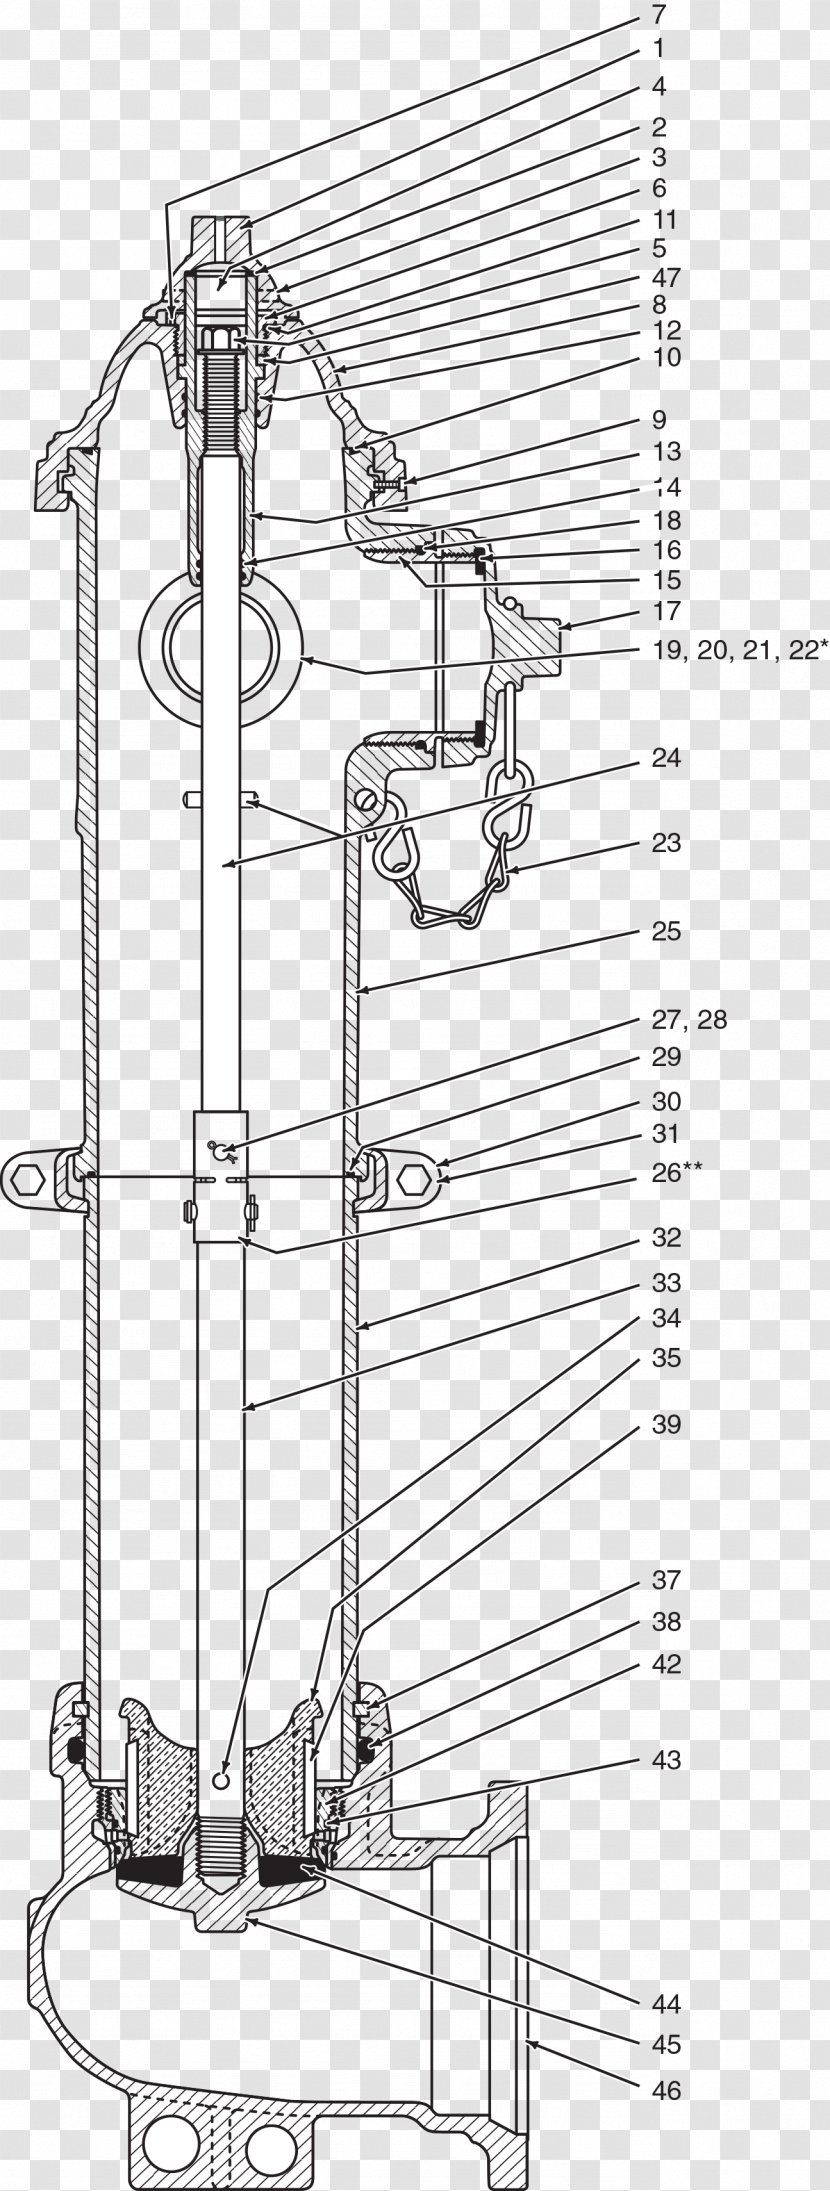 Fire Hydrant Wiring Diagram Technical Drawing Transparent PNG